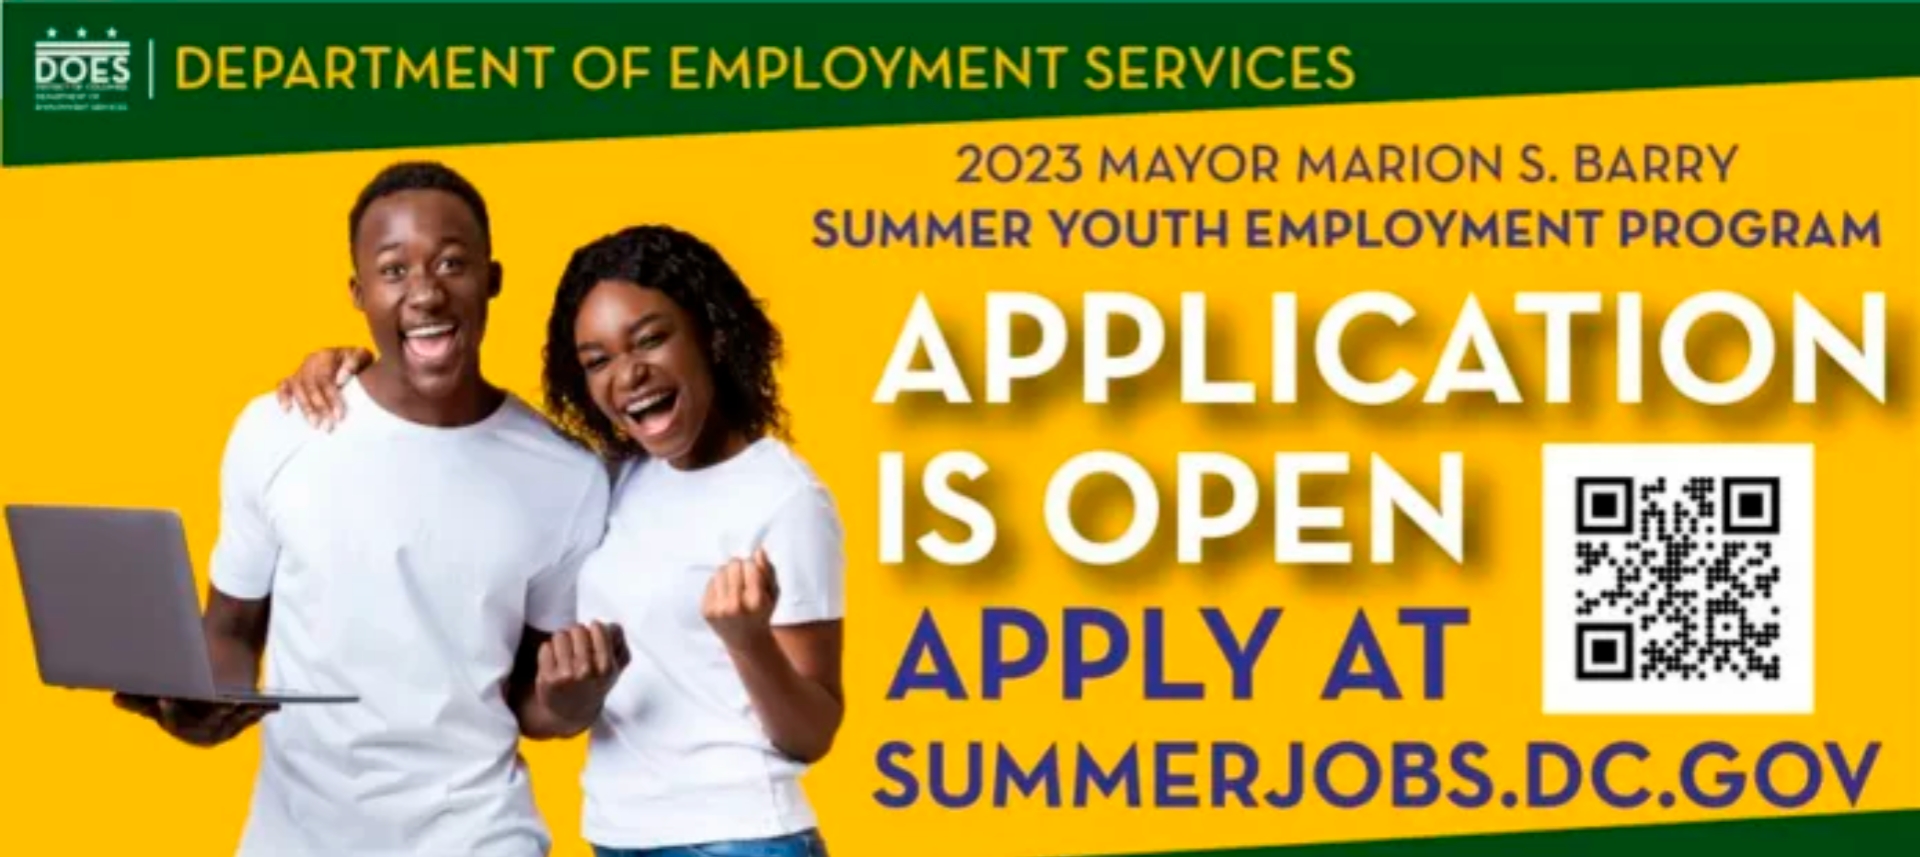 Summer Youth Employment Program 2023 for Mayor Marion Barry